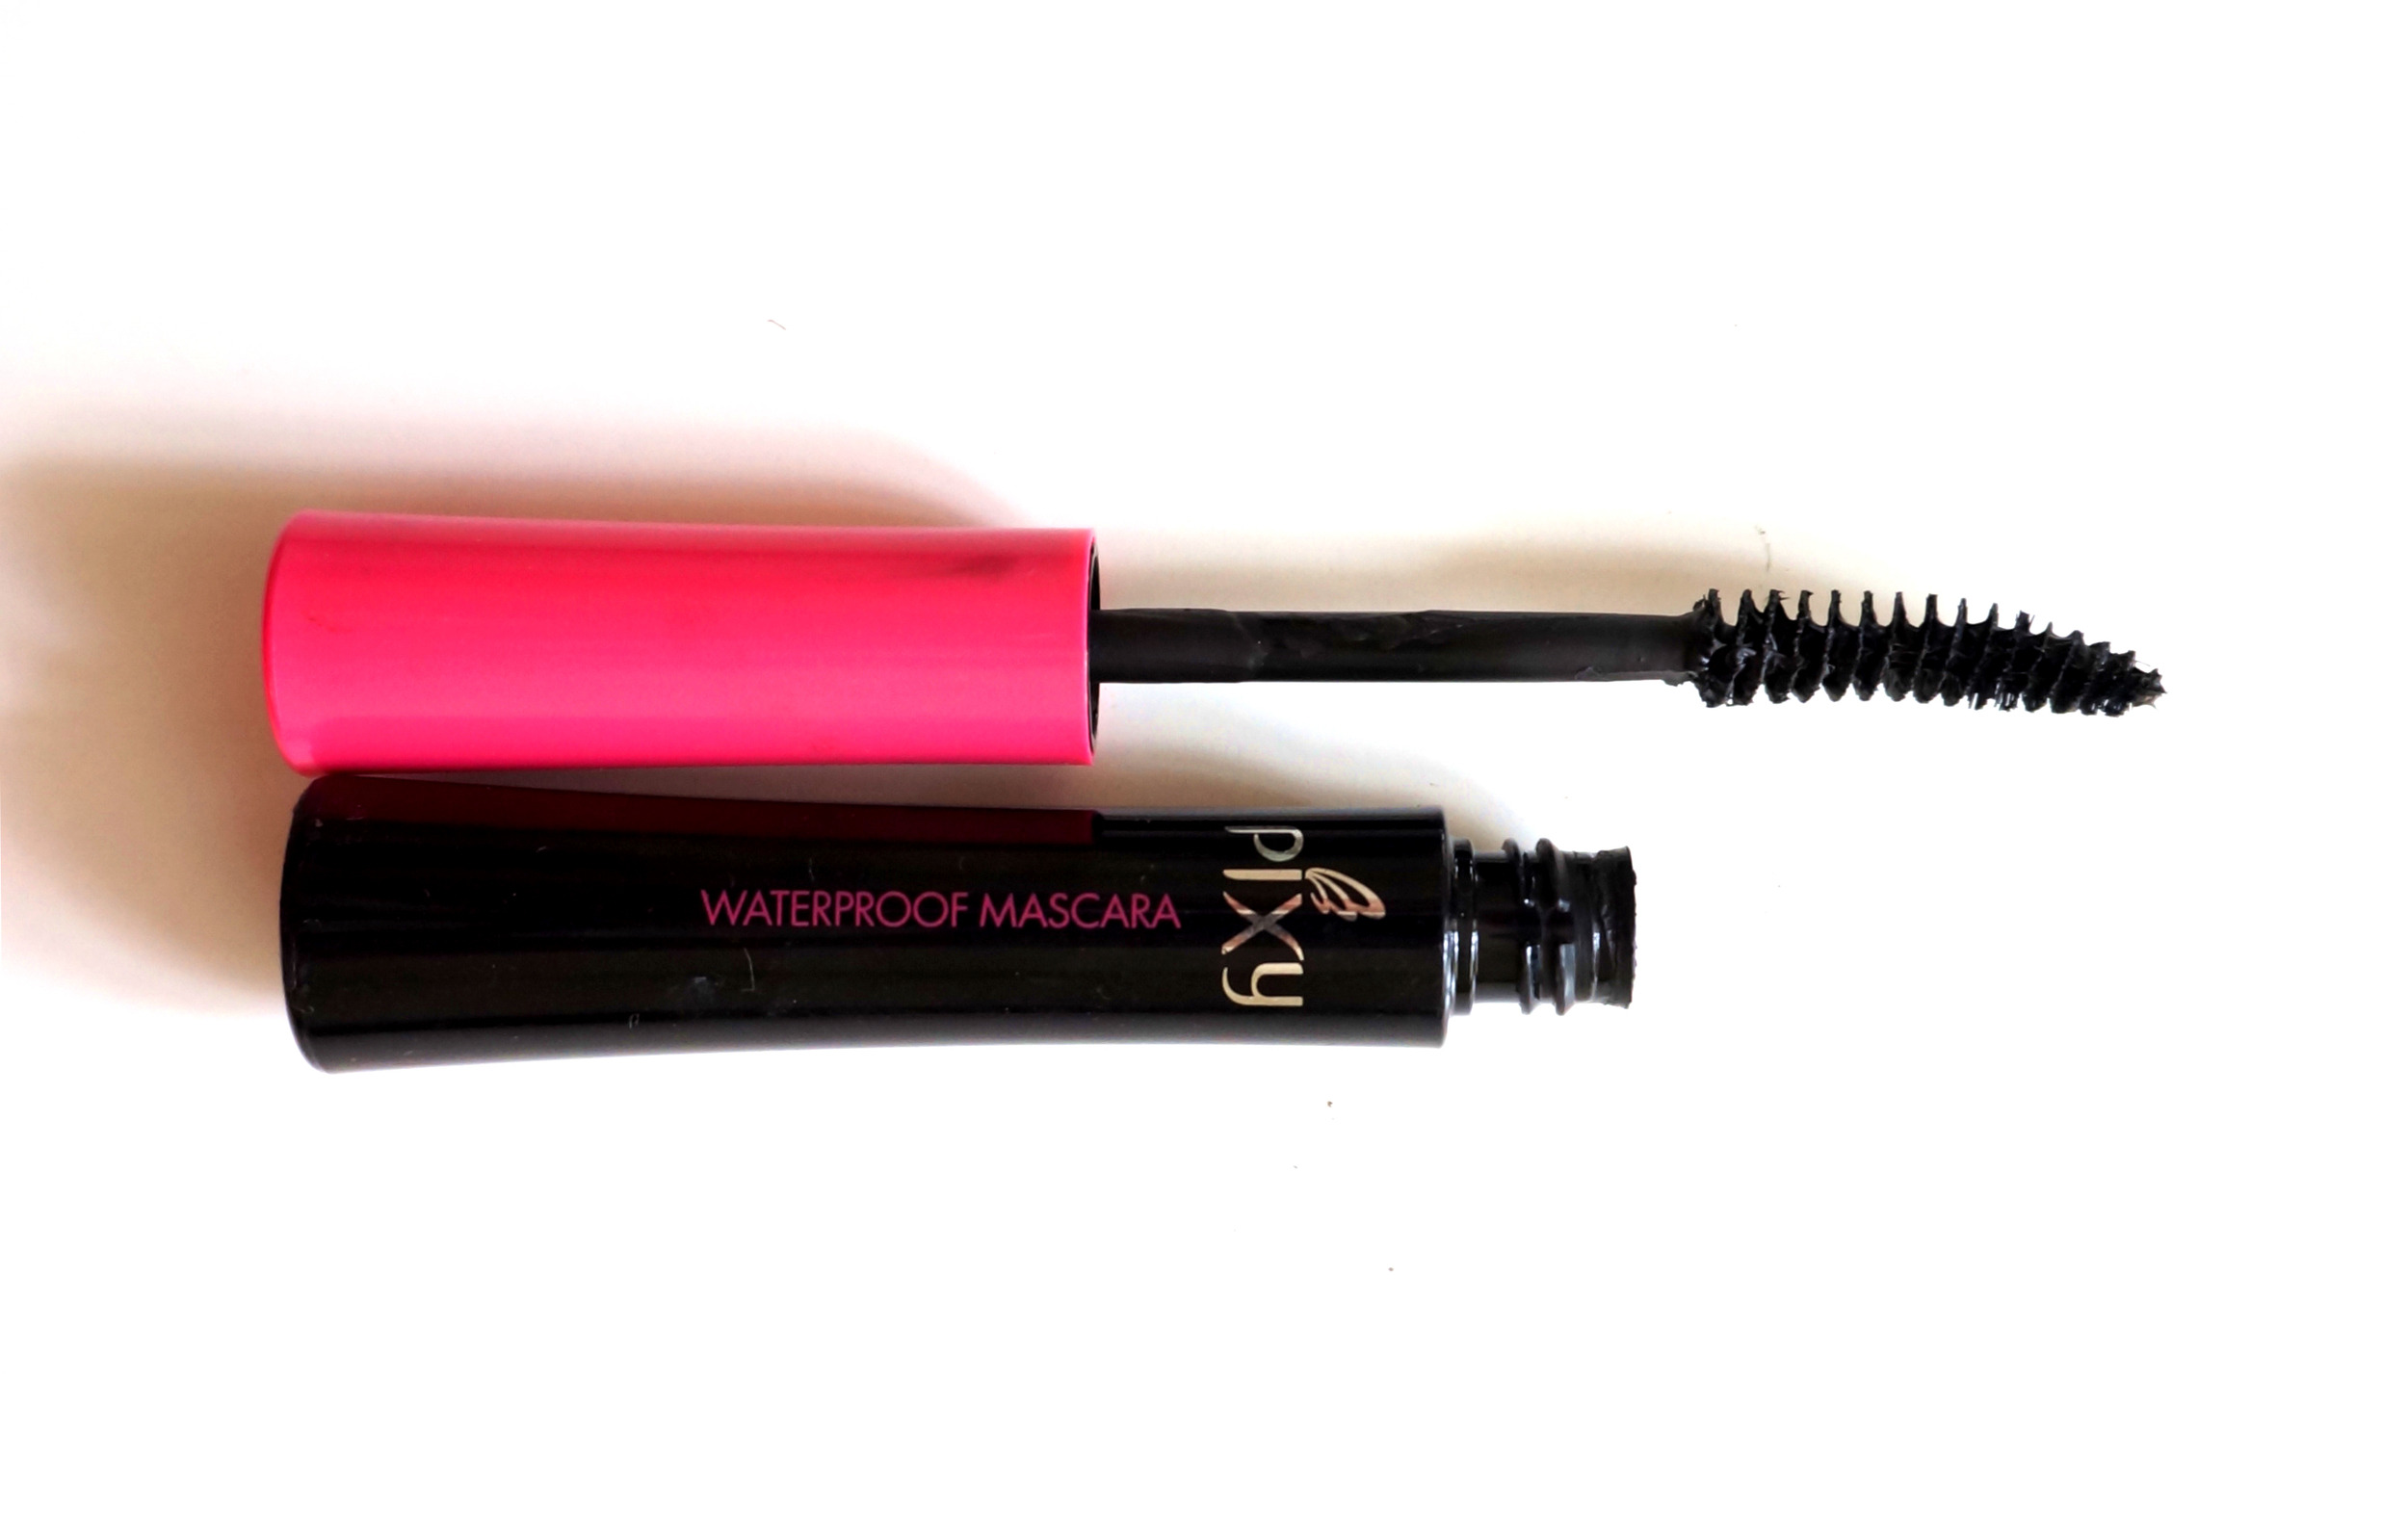  Step 10: Pump up your lashes with the Pixy Waterproof Mascara in Black (P260). This is a really, really good mascara. Seriously. I only used two layers to get falsies-level lashes. 